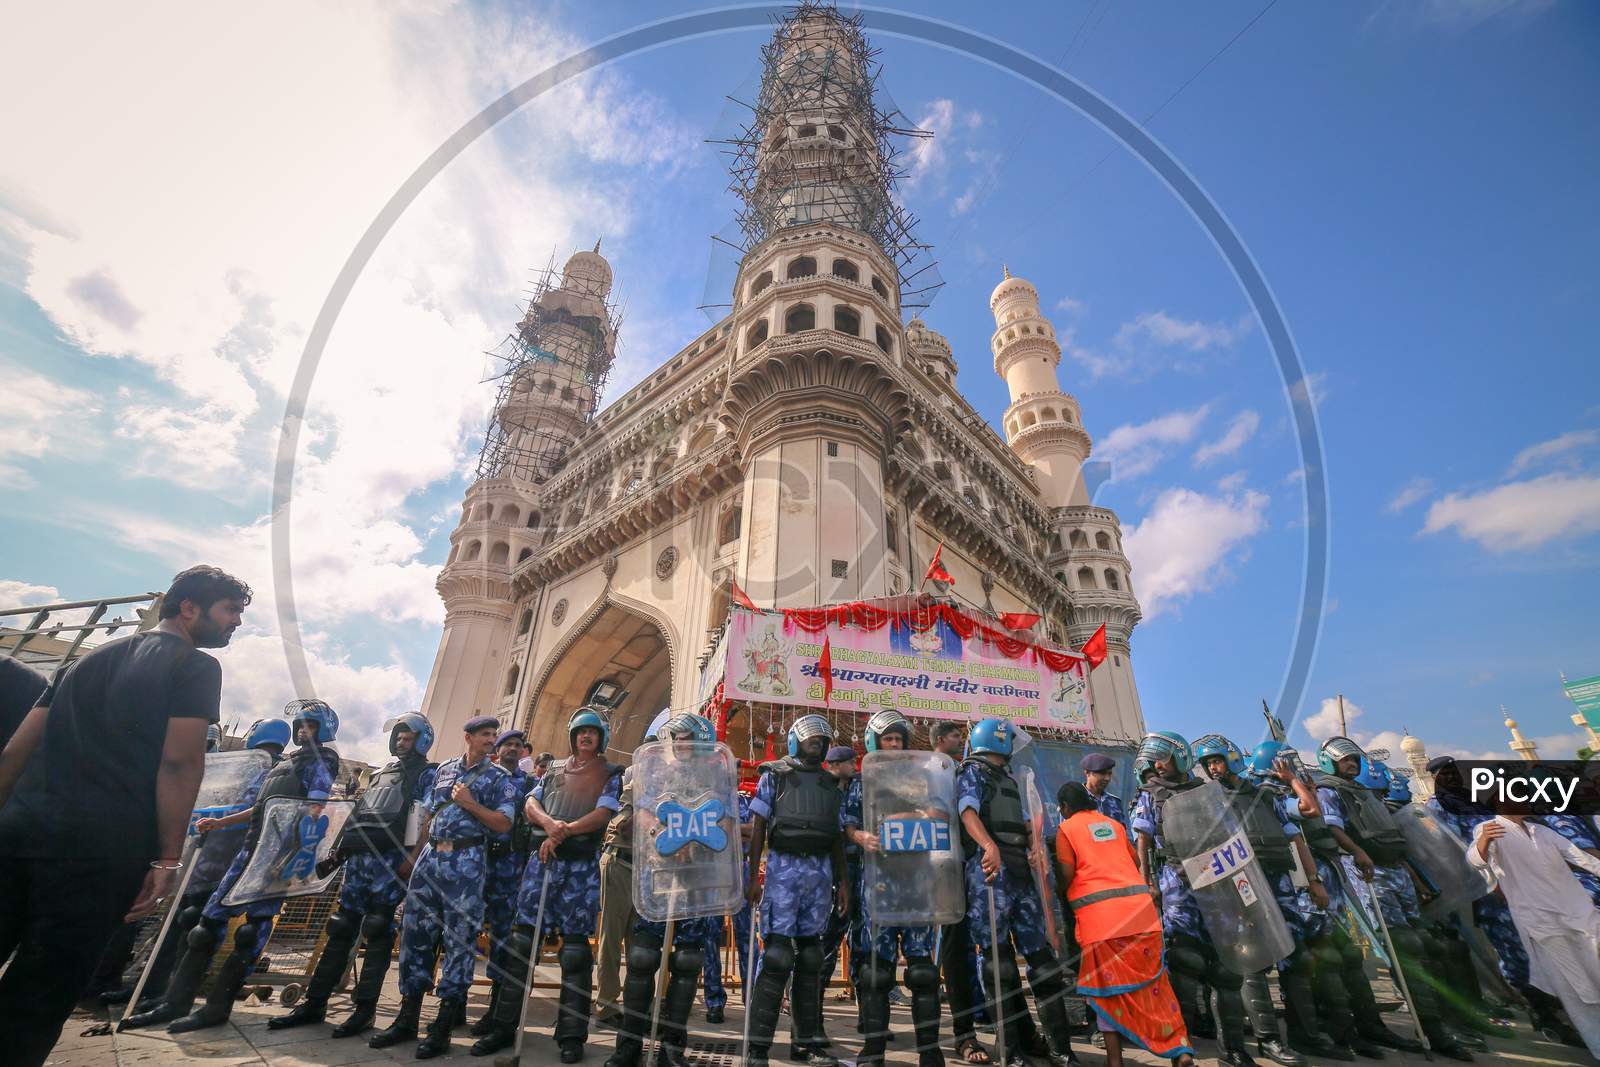 Royal Air Force Heavy security during Ayodhya Verdict at Charminar